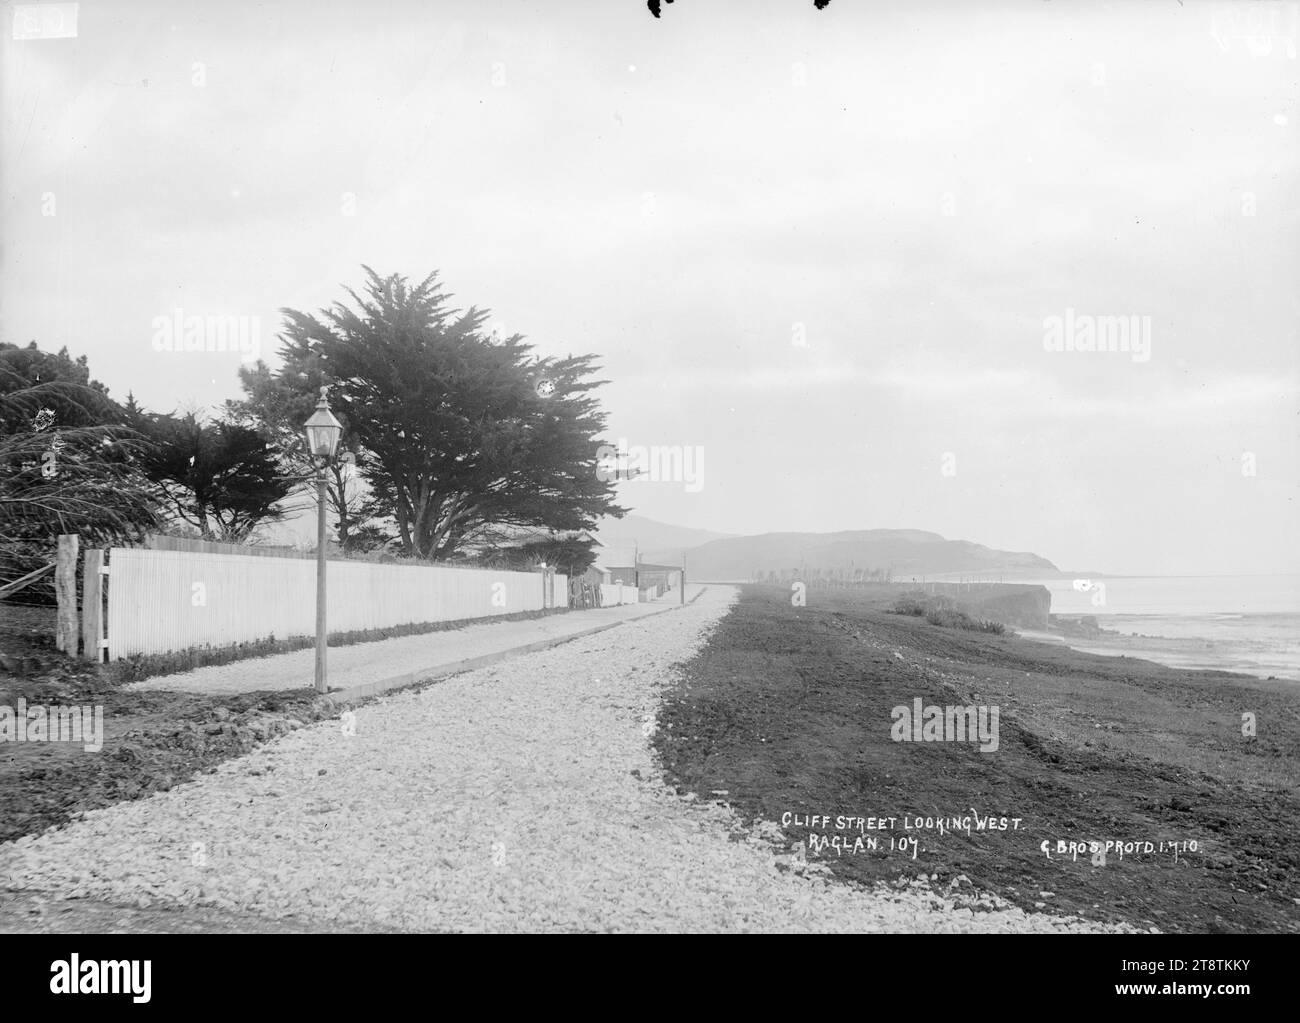 Cliff Street, Raglan, New Zealand, 1910, Cliff Street, Raglan, New Zealand, looking West. The street runs between the coast and a white picket fence. A street lamp is at the edge of a footpath near the fence. Photograph taken by the Gilmour Brothers Stock Photo